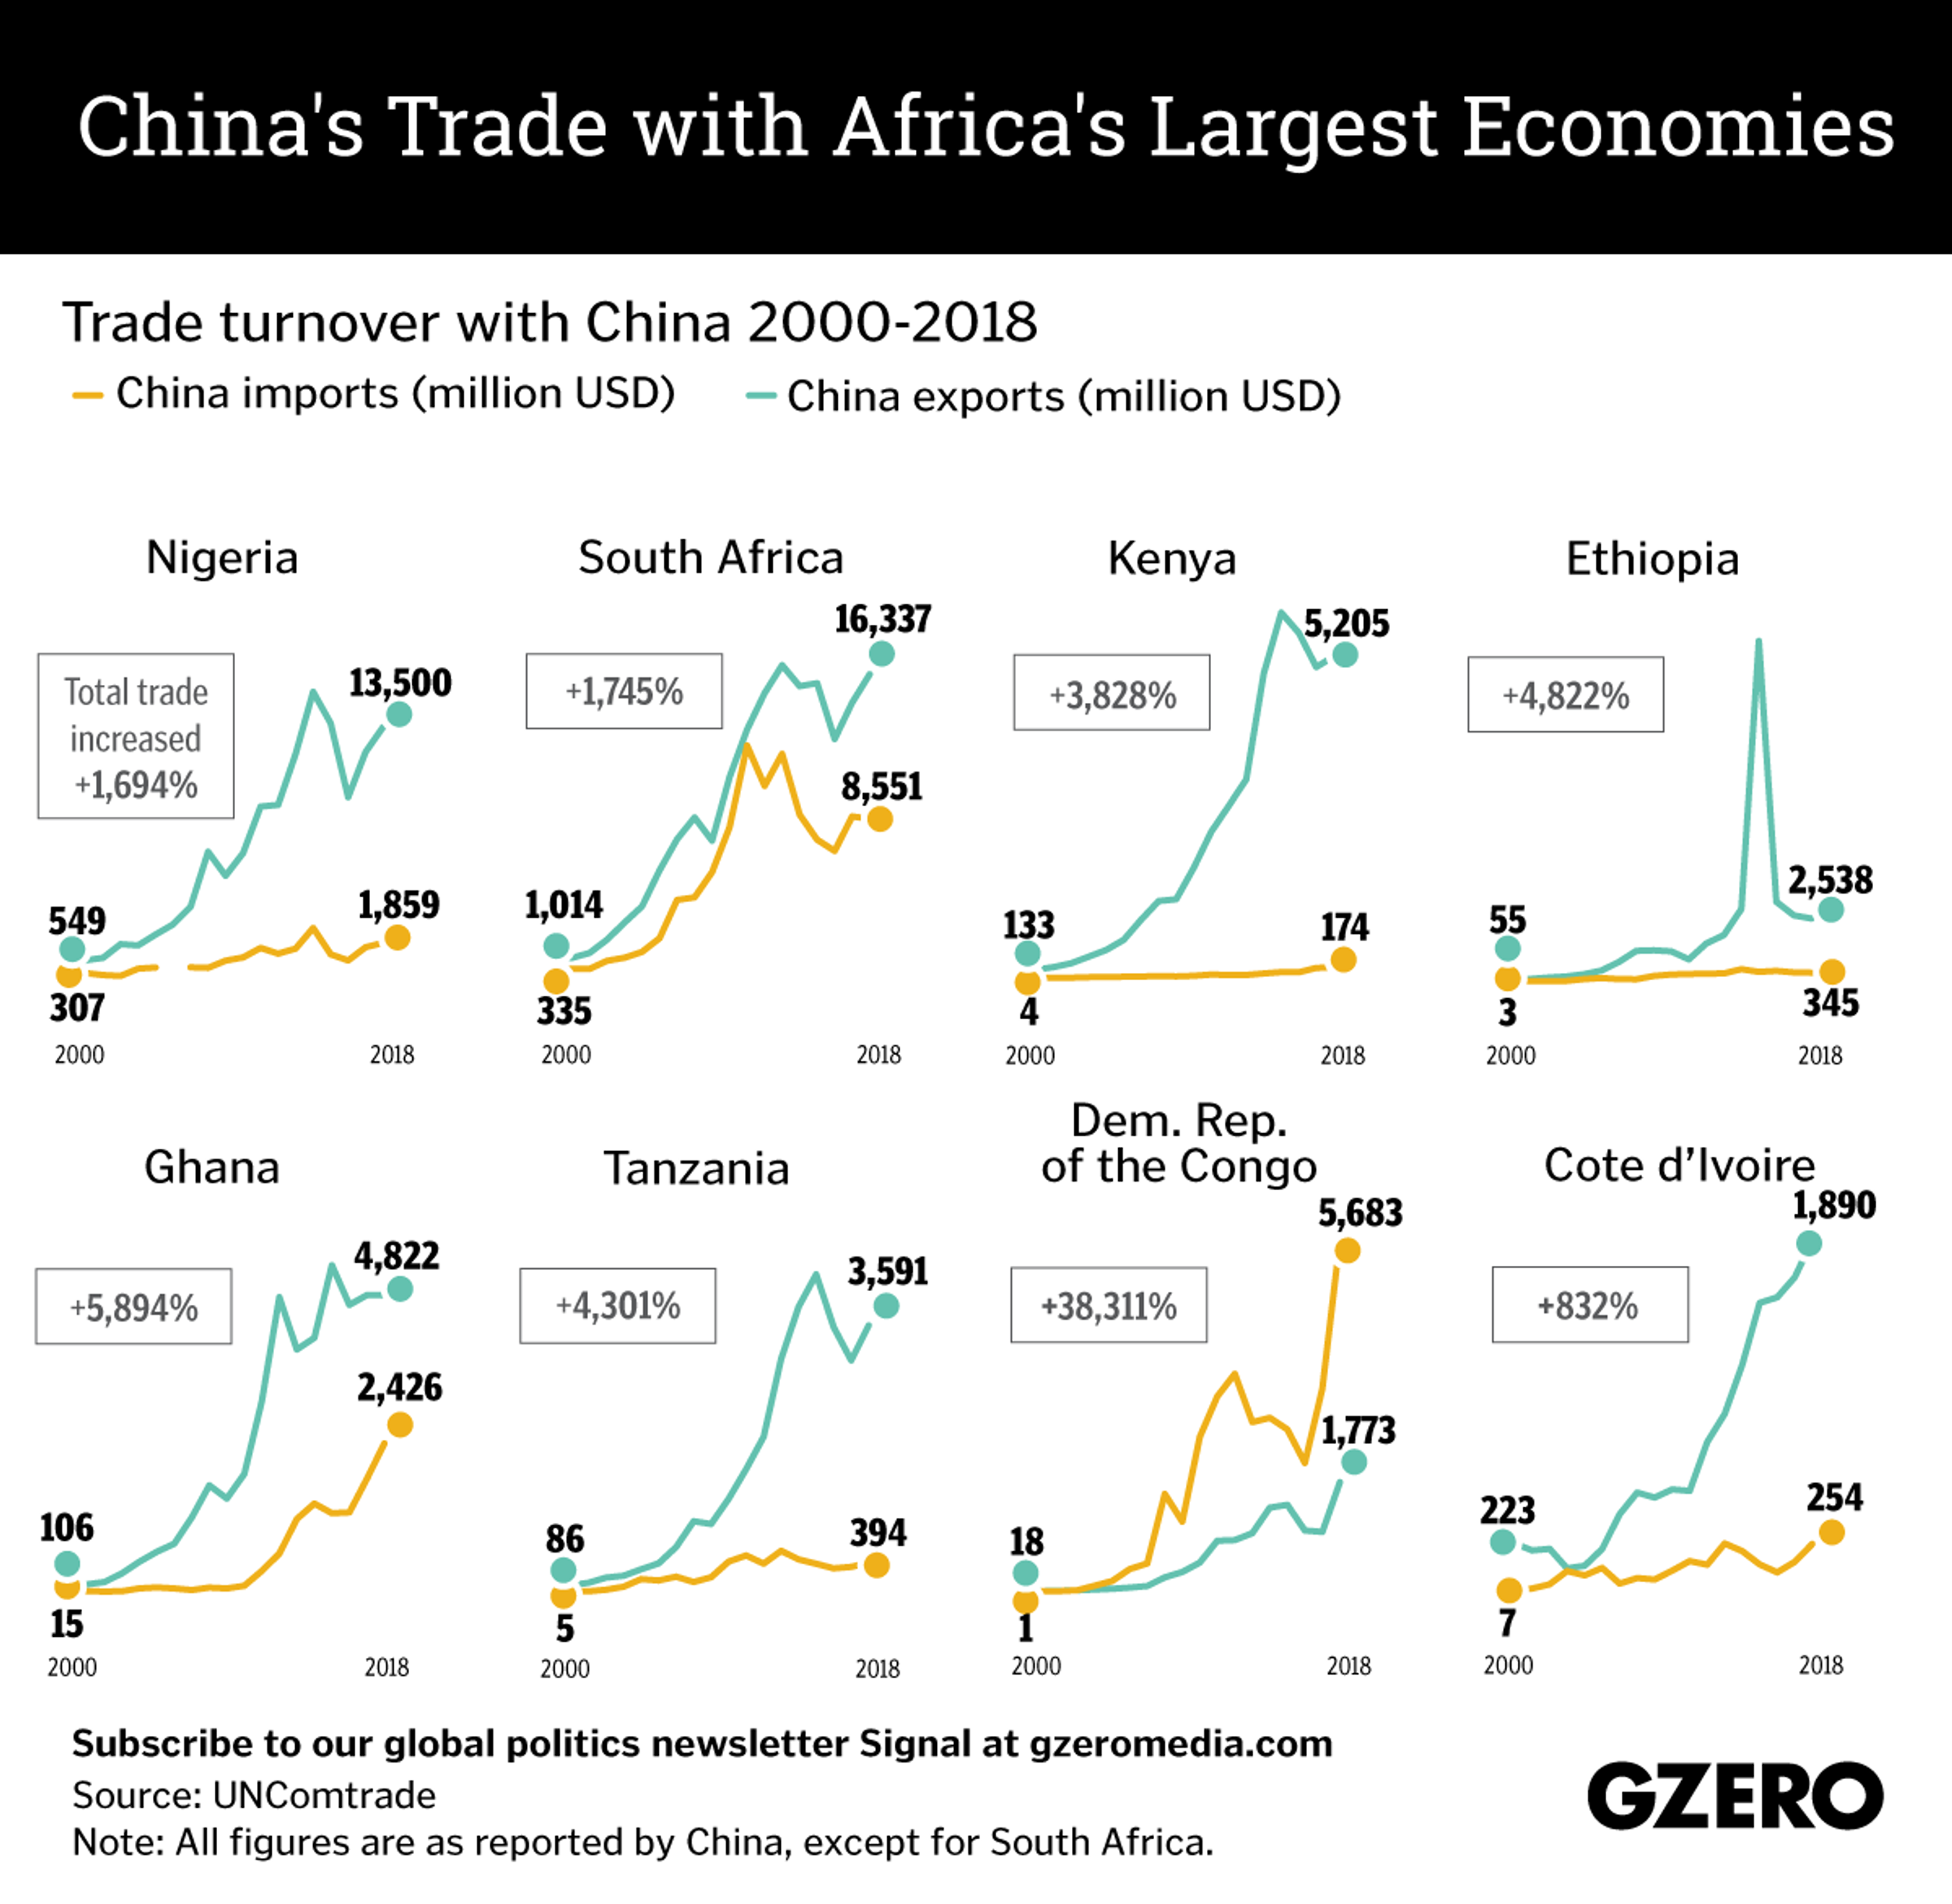 The Graphic Truth: China's trade with Africa's largest economies